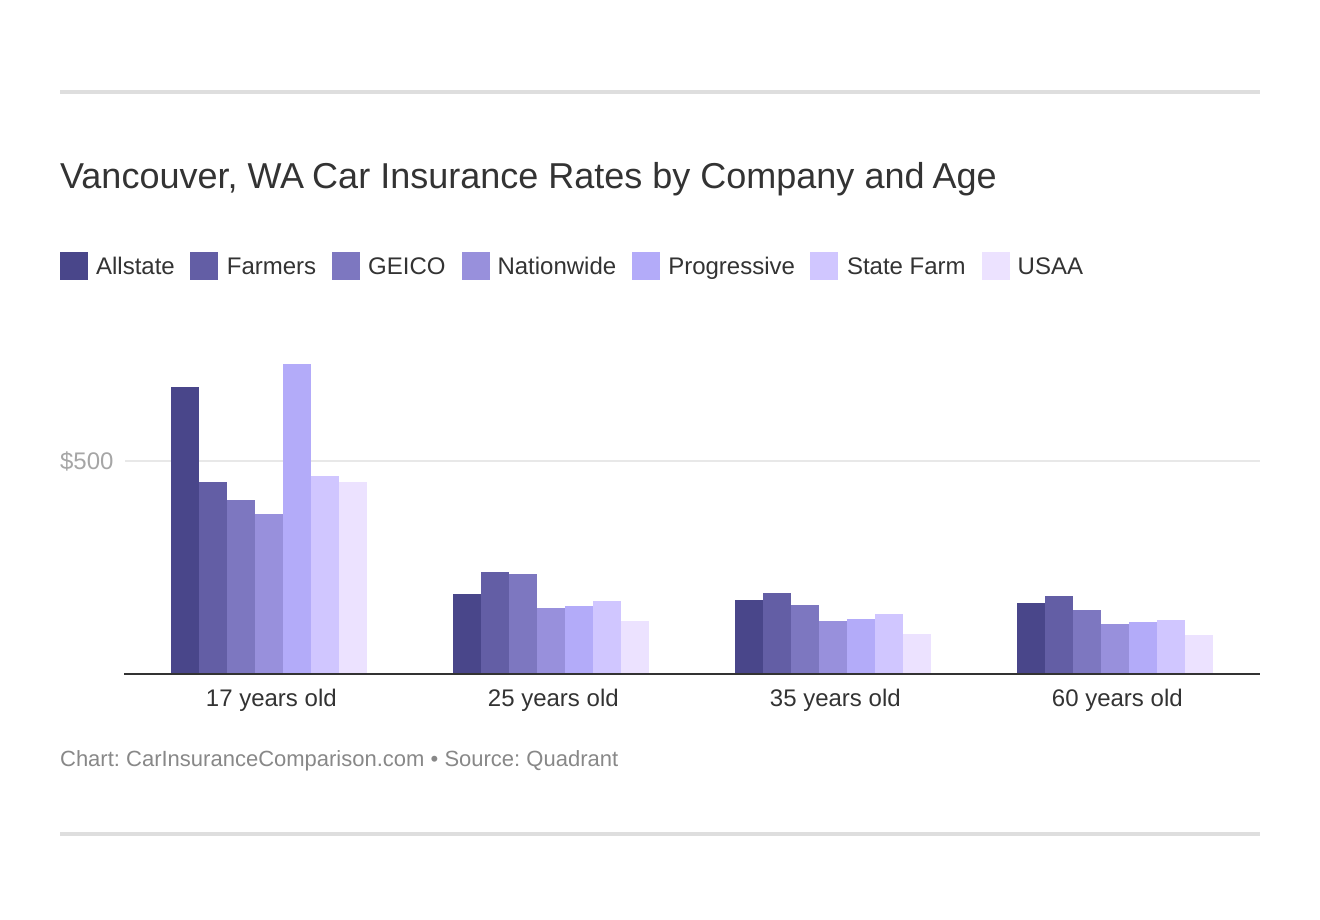 Vancouver, WA Car Insurance Rates by Company and Age